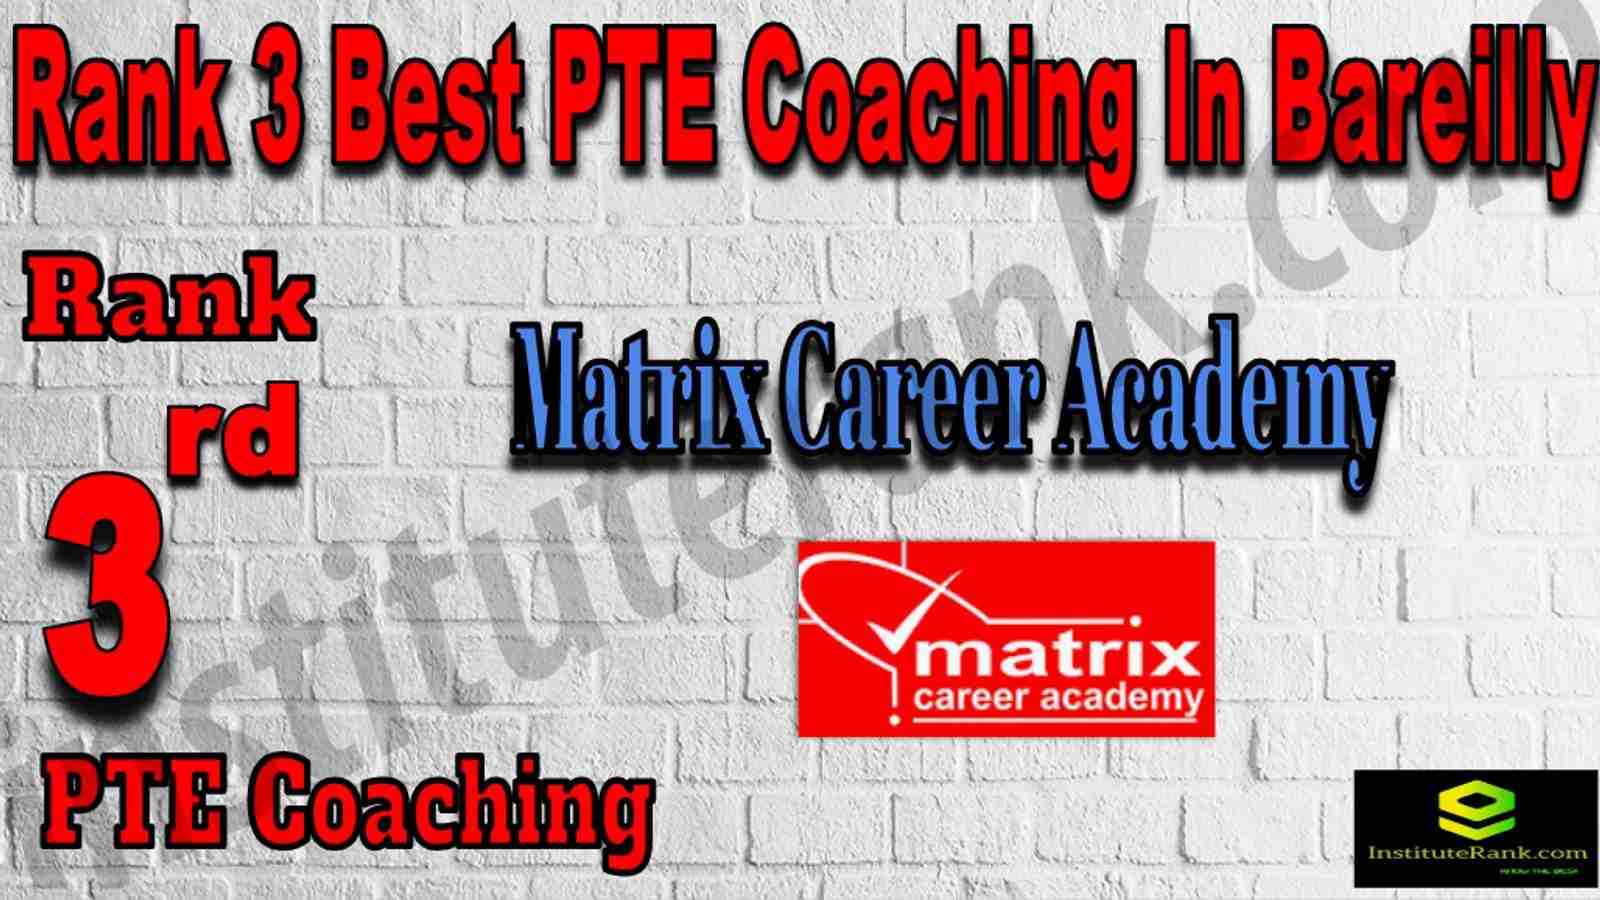 Rank 3 Best PTE Coaching In Bareilly